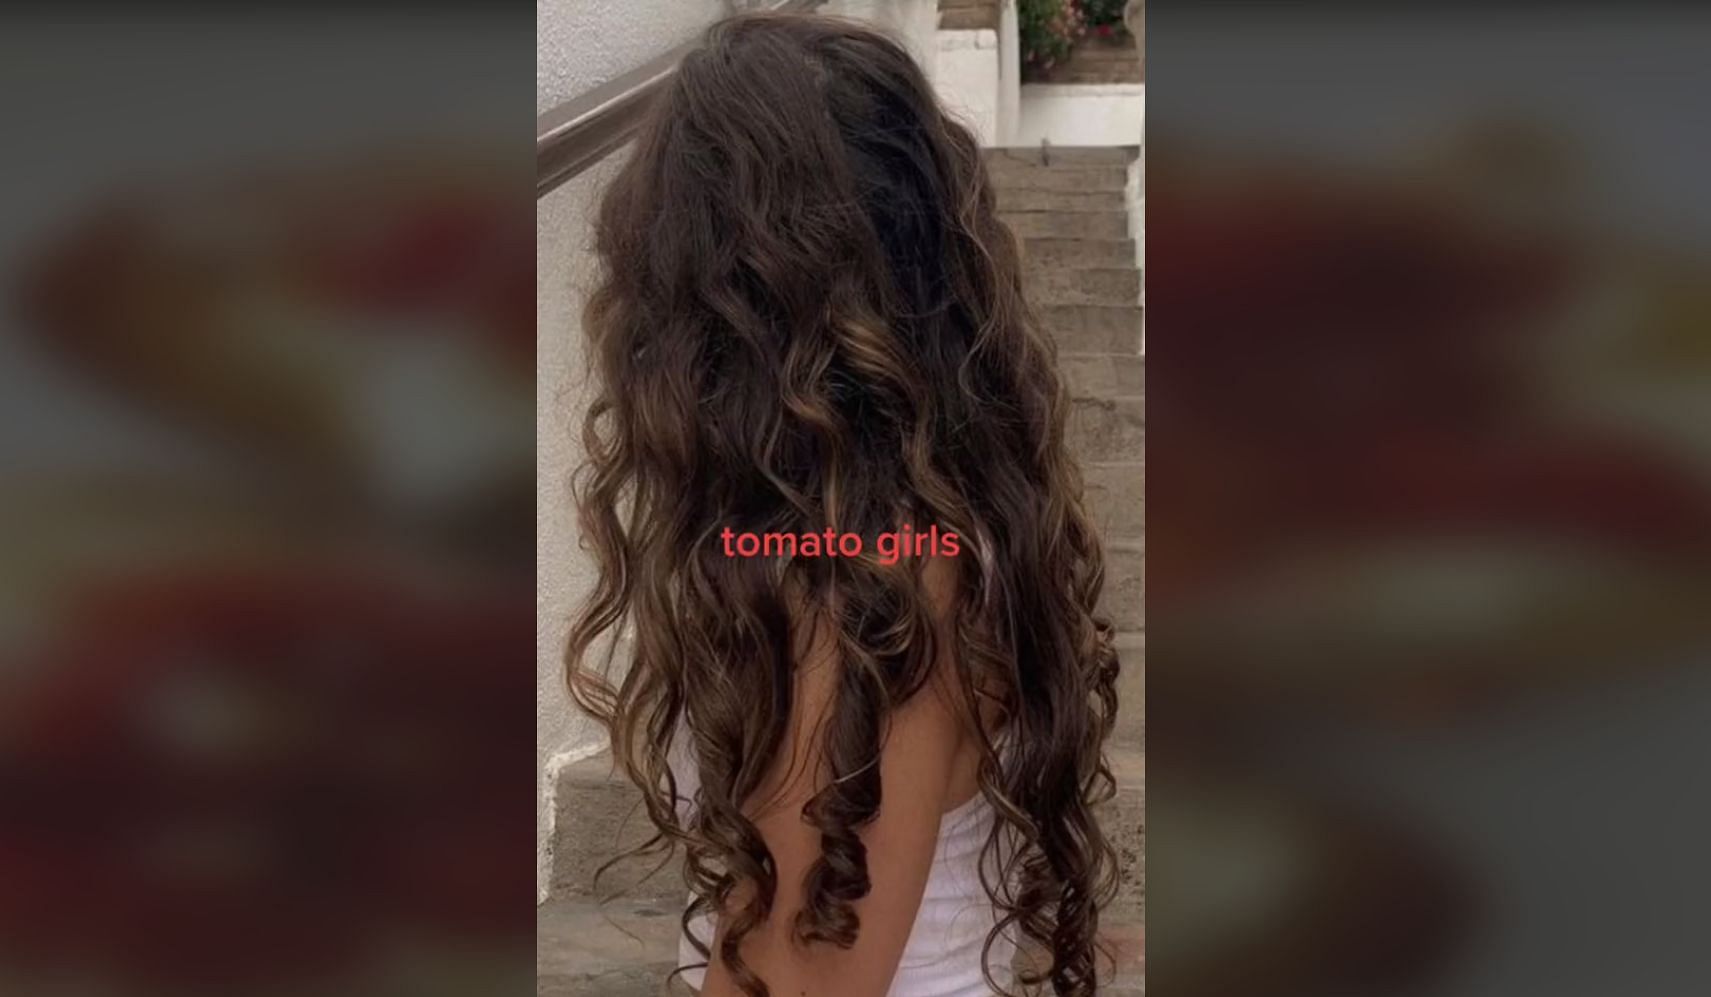 Everything You Need to Know About TikTok's Tomato Girl Style Trend